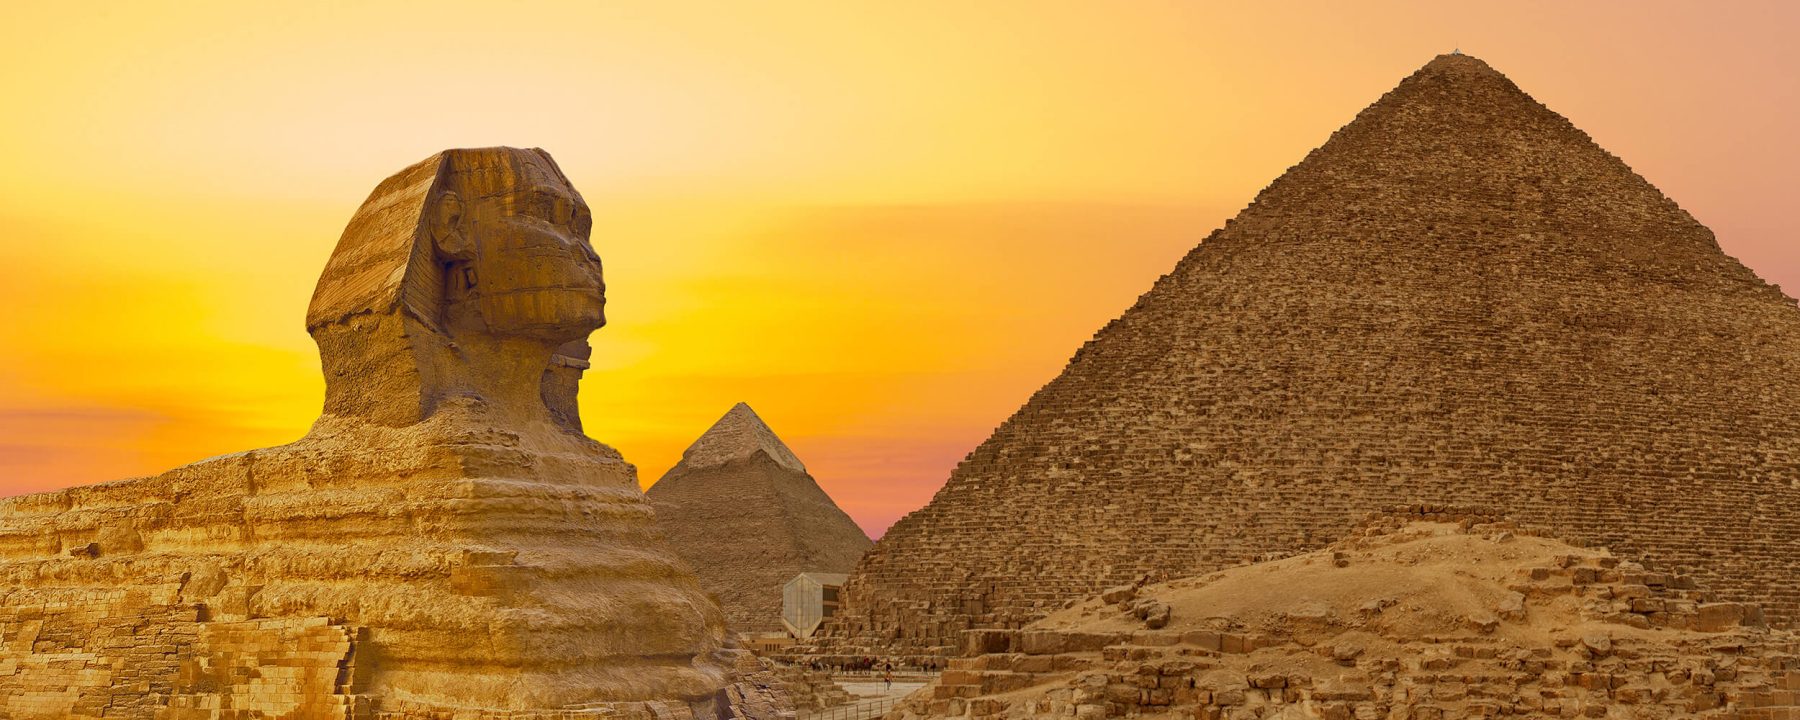 sphinx at sunset egypt